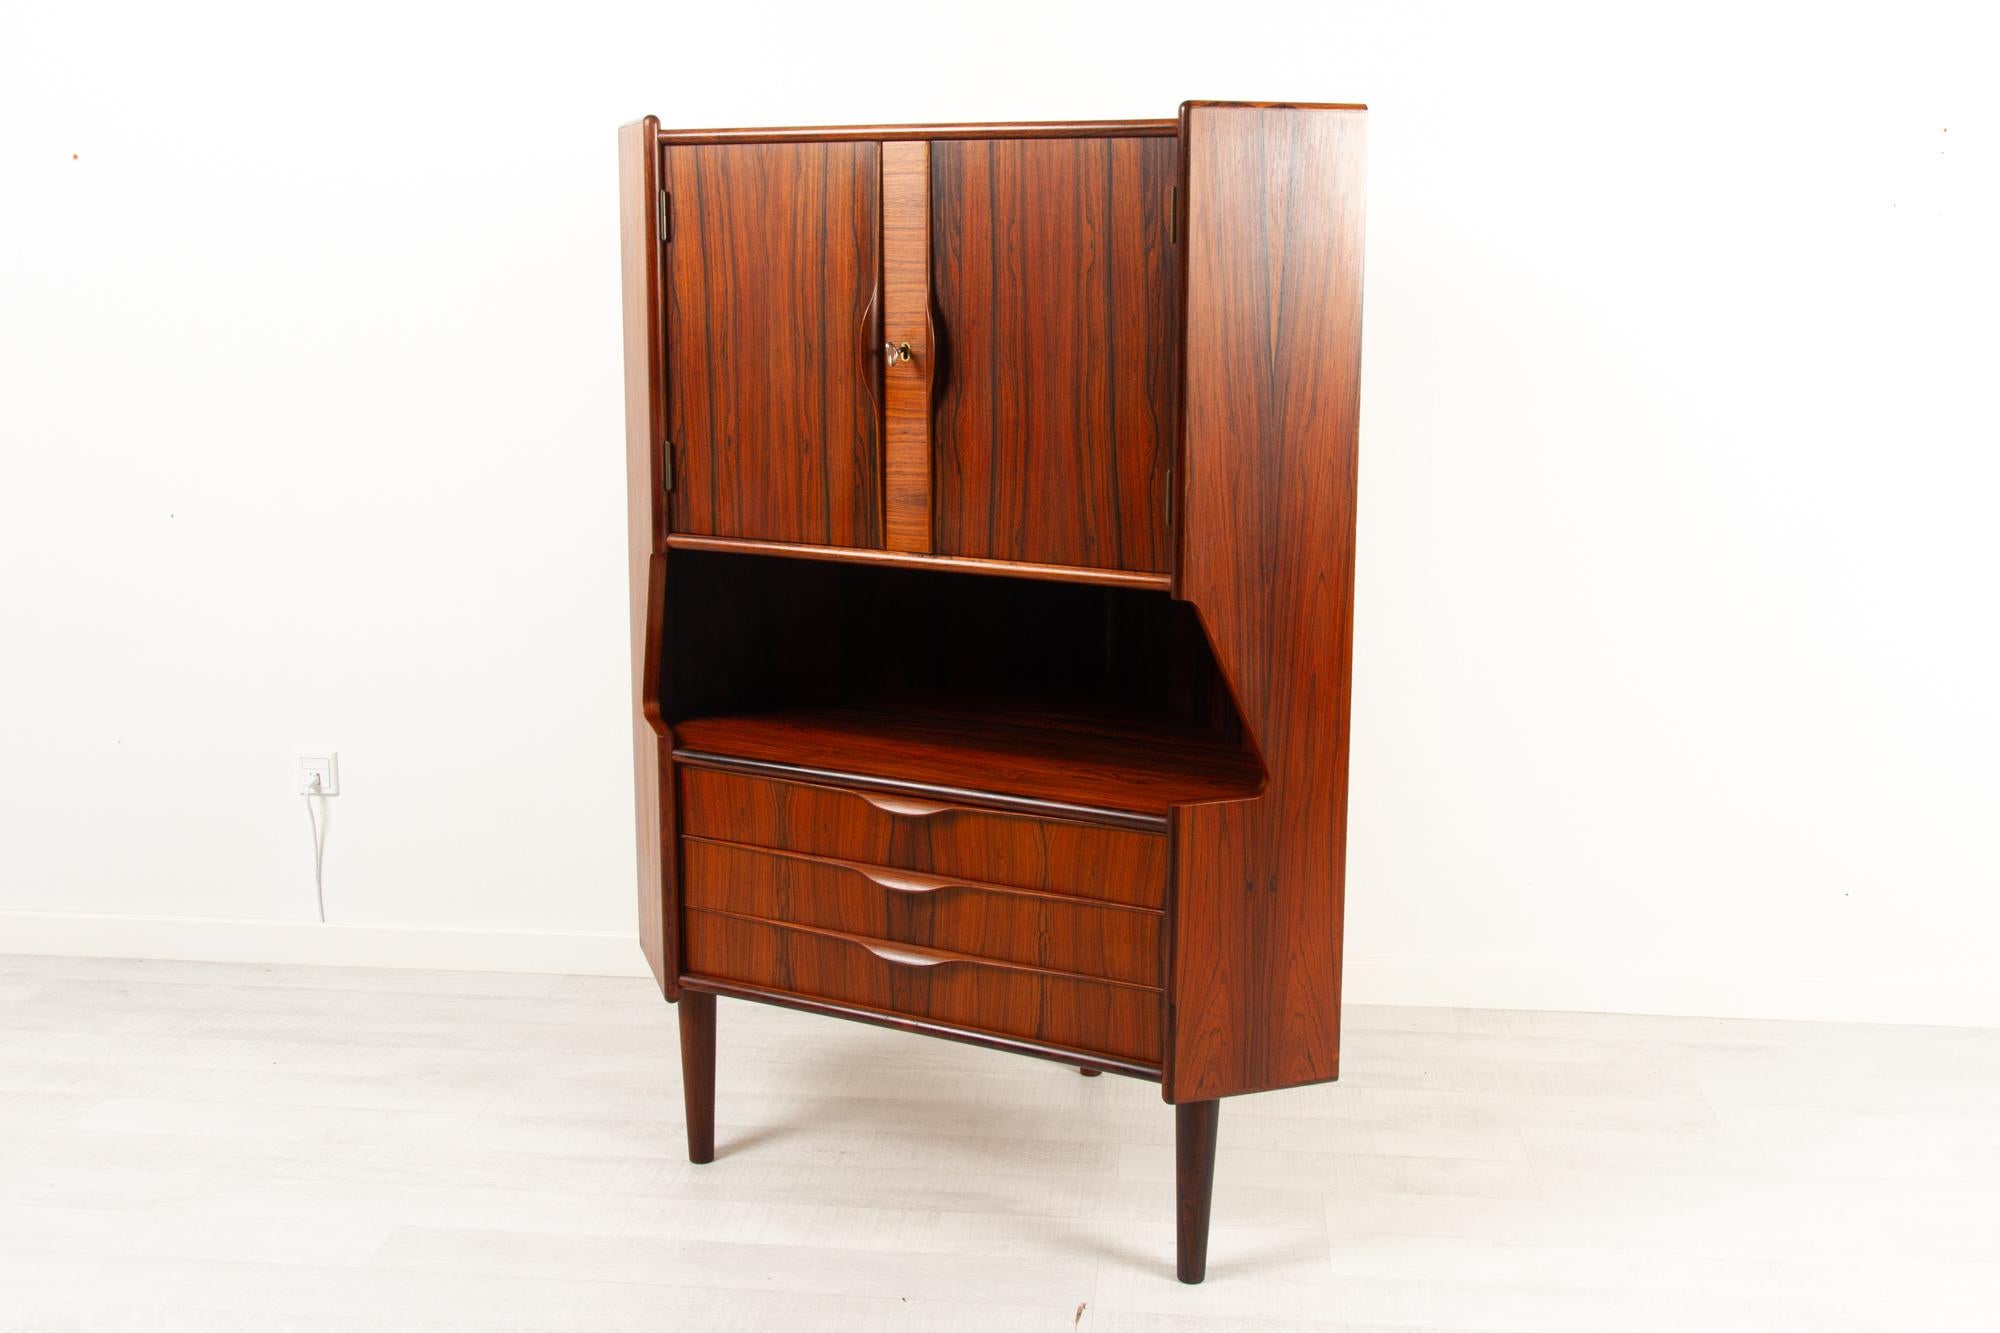 Mid-20th Century Vintage Danish Rosewood Corner Cabinet with Dry Bar, 1960s